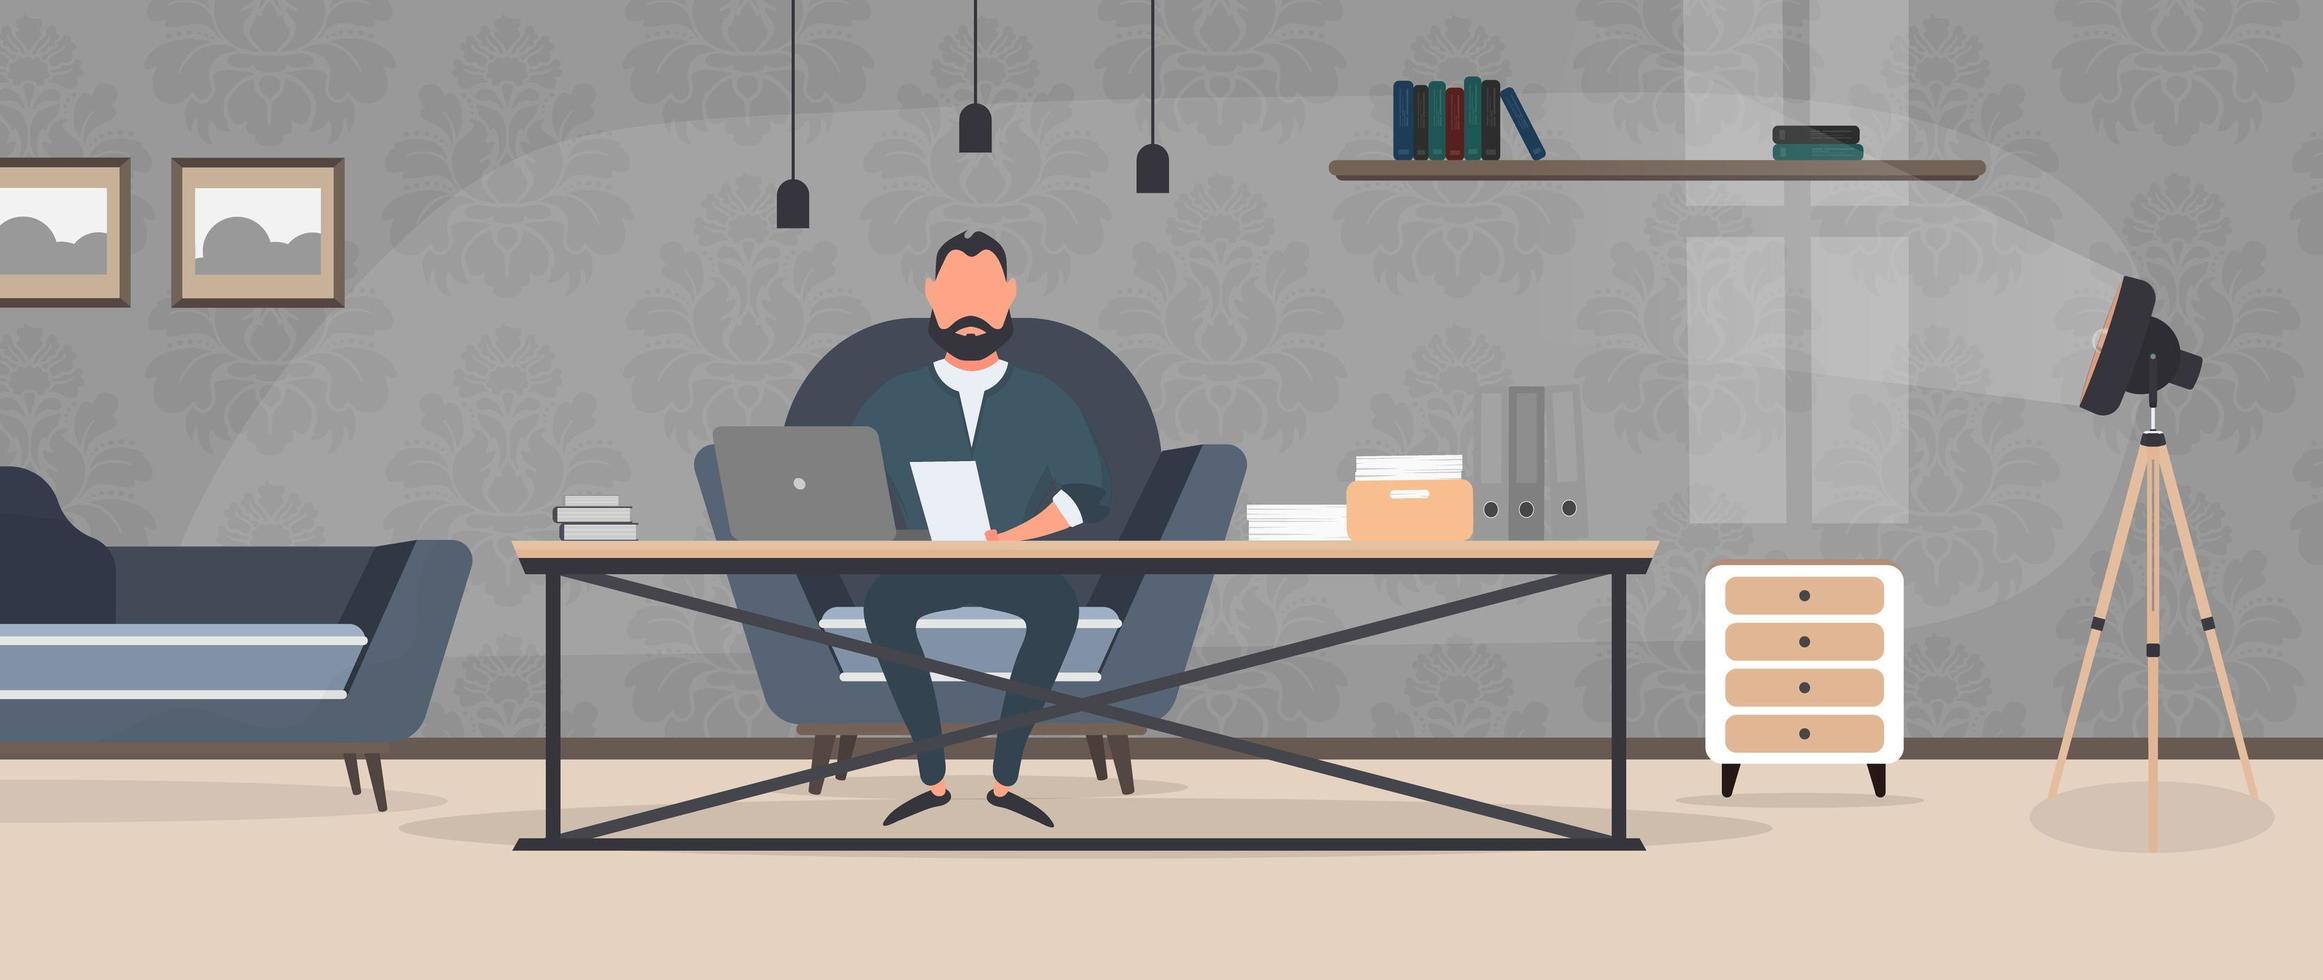 A guy with glasses sits at a table in his office. A man works on a laptop. Office, sofa, bookshelf, business man, floor lamp. Office work concept. Vector. vector